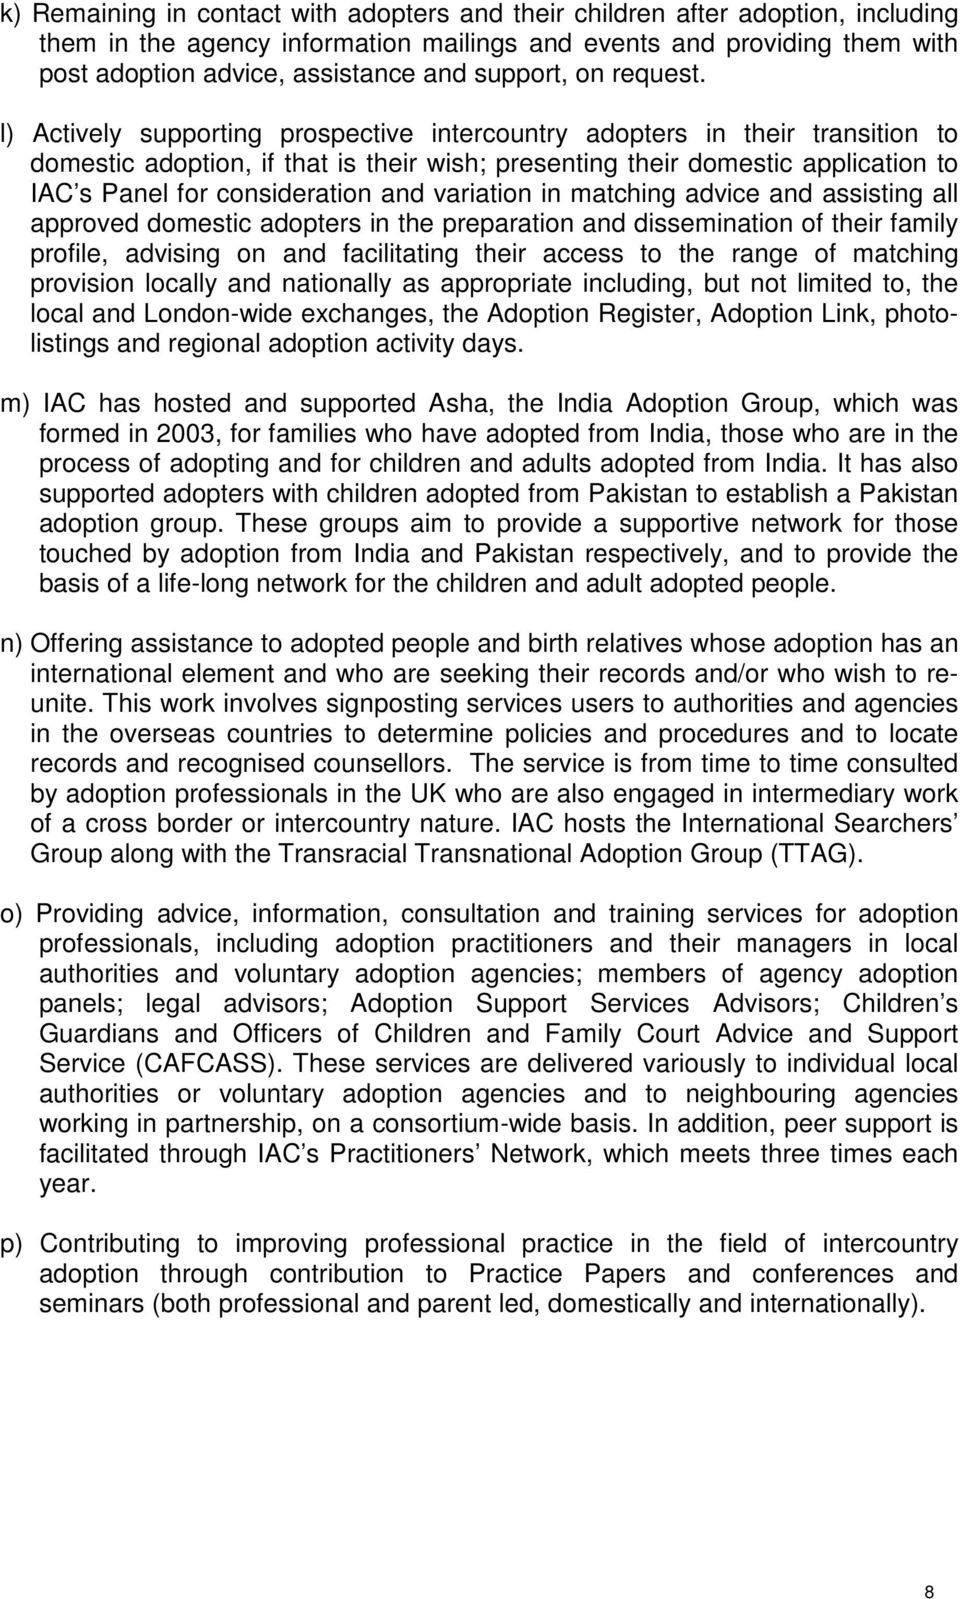 l) Actively supporting prospective intercountry adopters in their transition to domestic adoption, if that is their wish; presenting their domestic application to IAC s Panel for consideration and